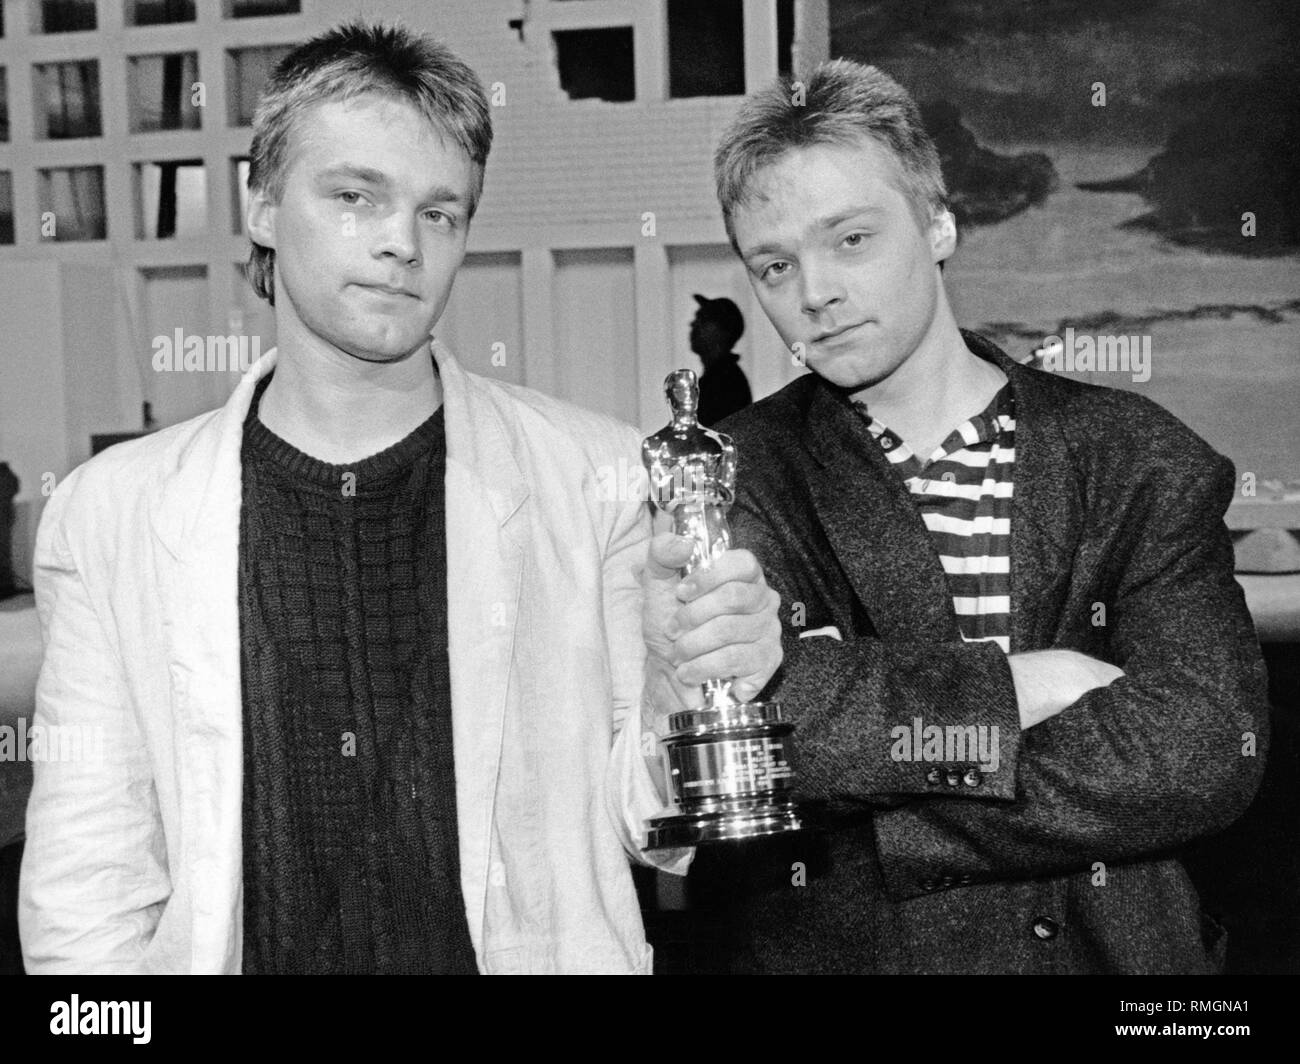 The brothers Christoph and Wolfgang Lauenstein with their Oscar for the animated film 'Balance'. Stock Photo